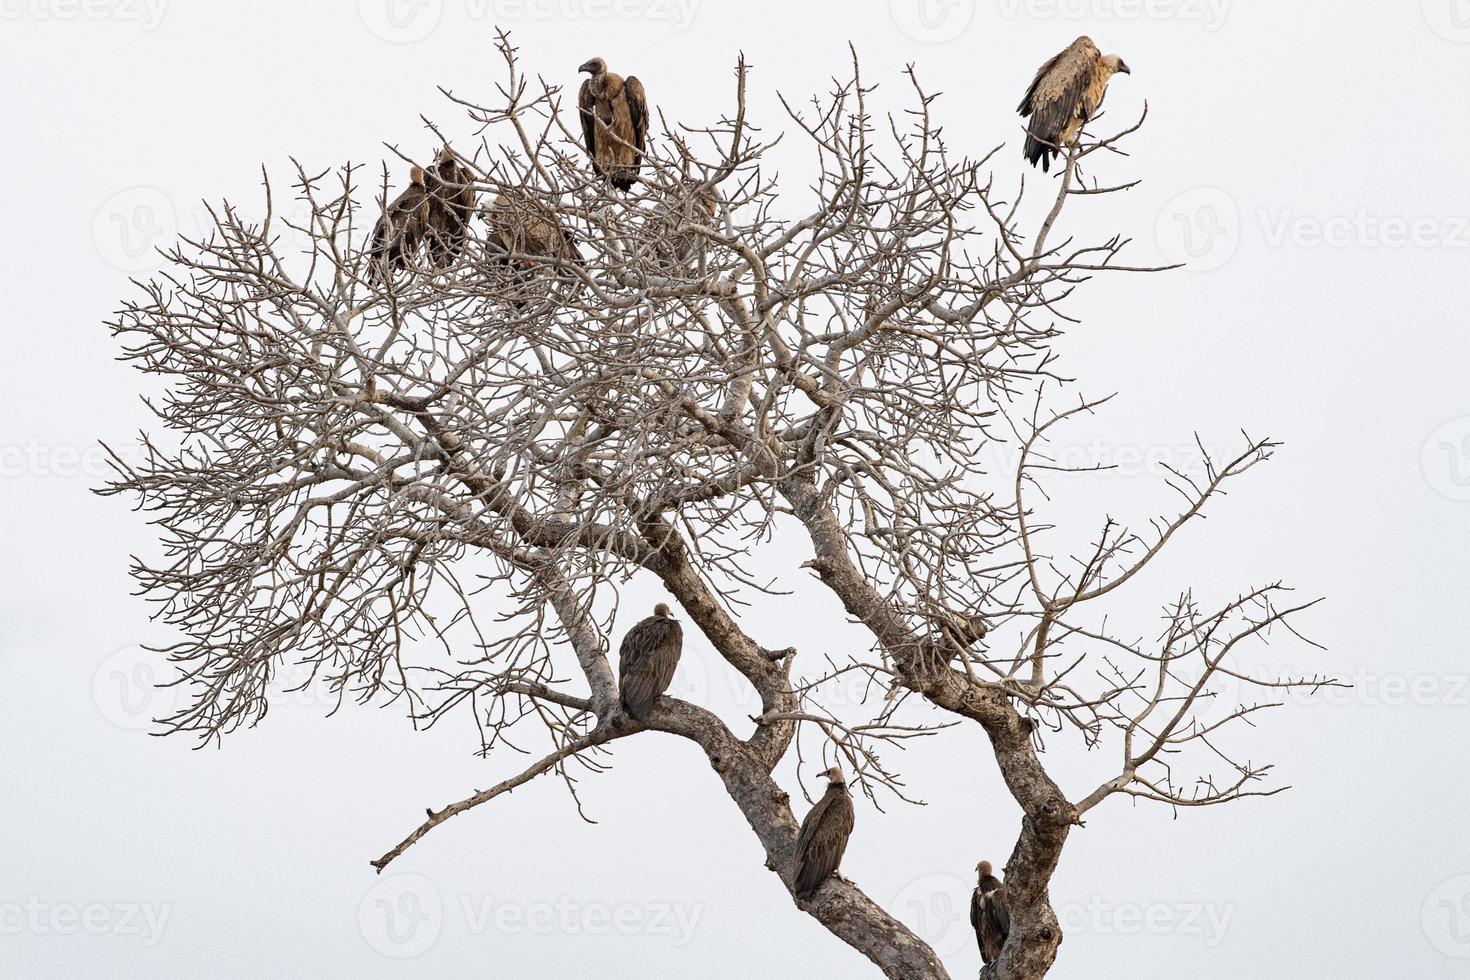 vulture on a tree in kruger park photo